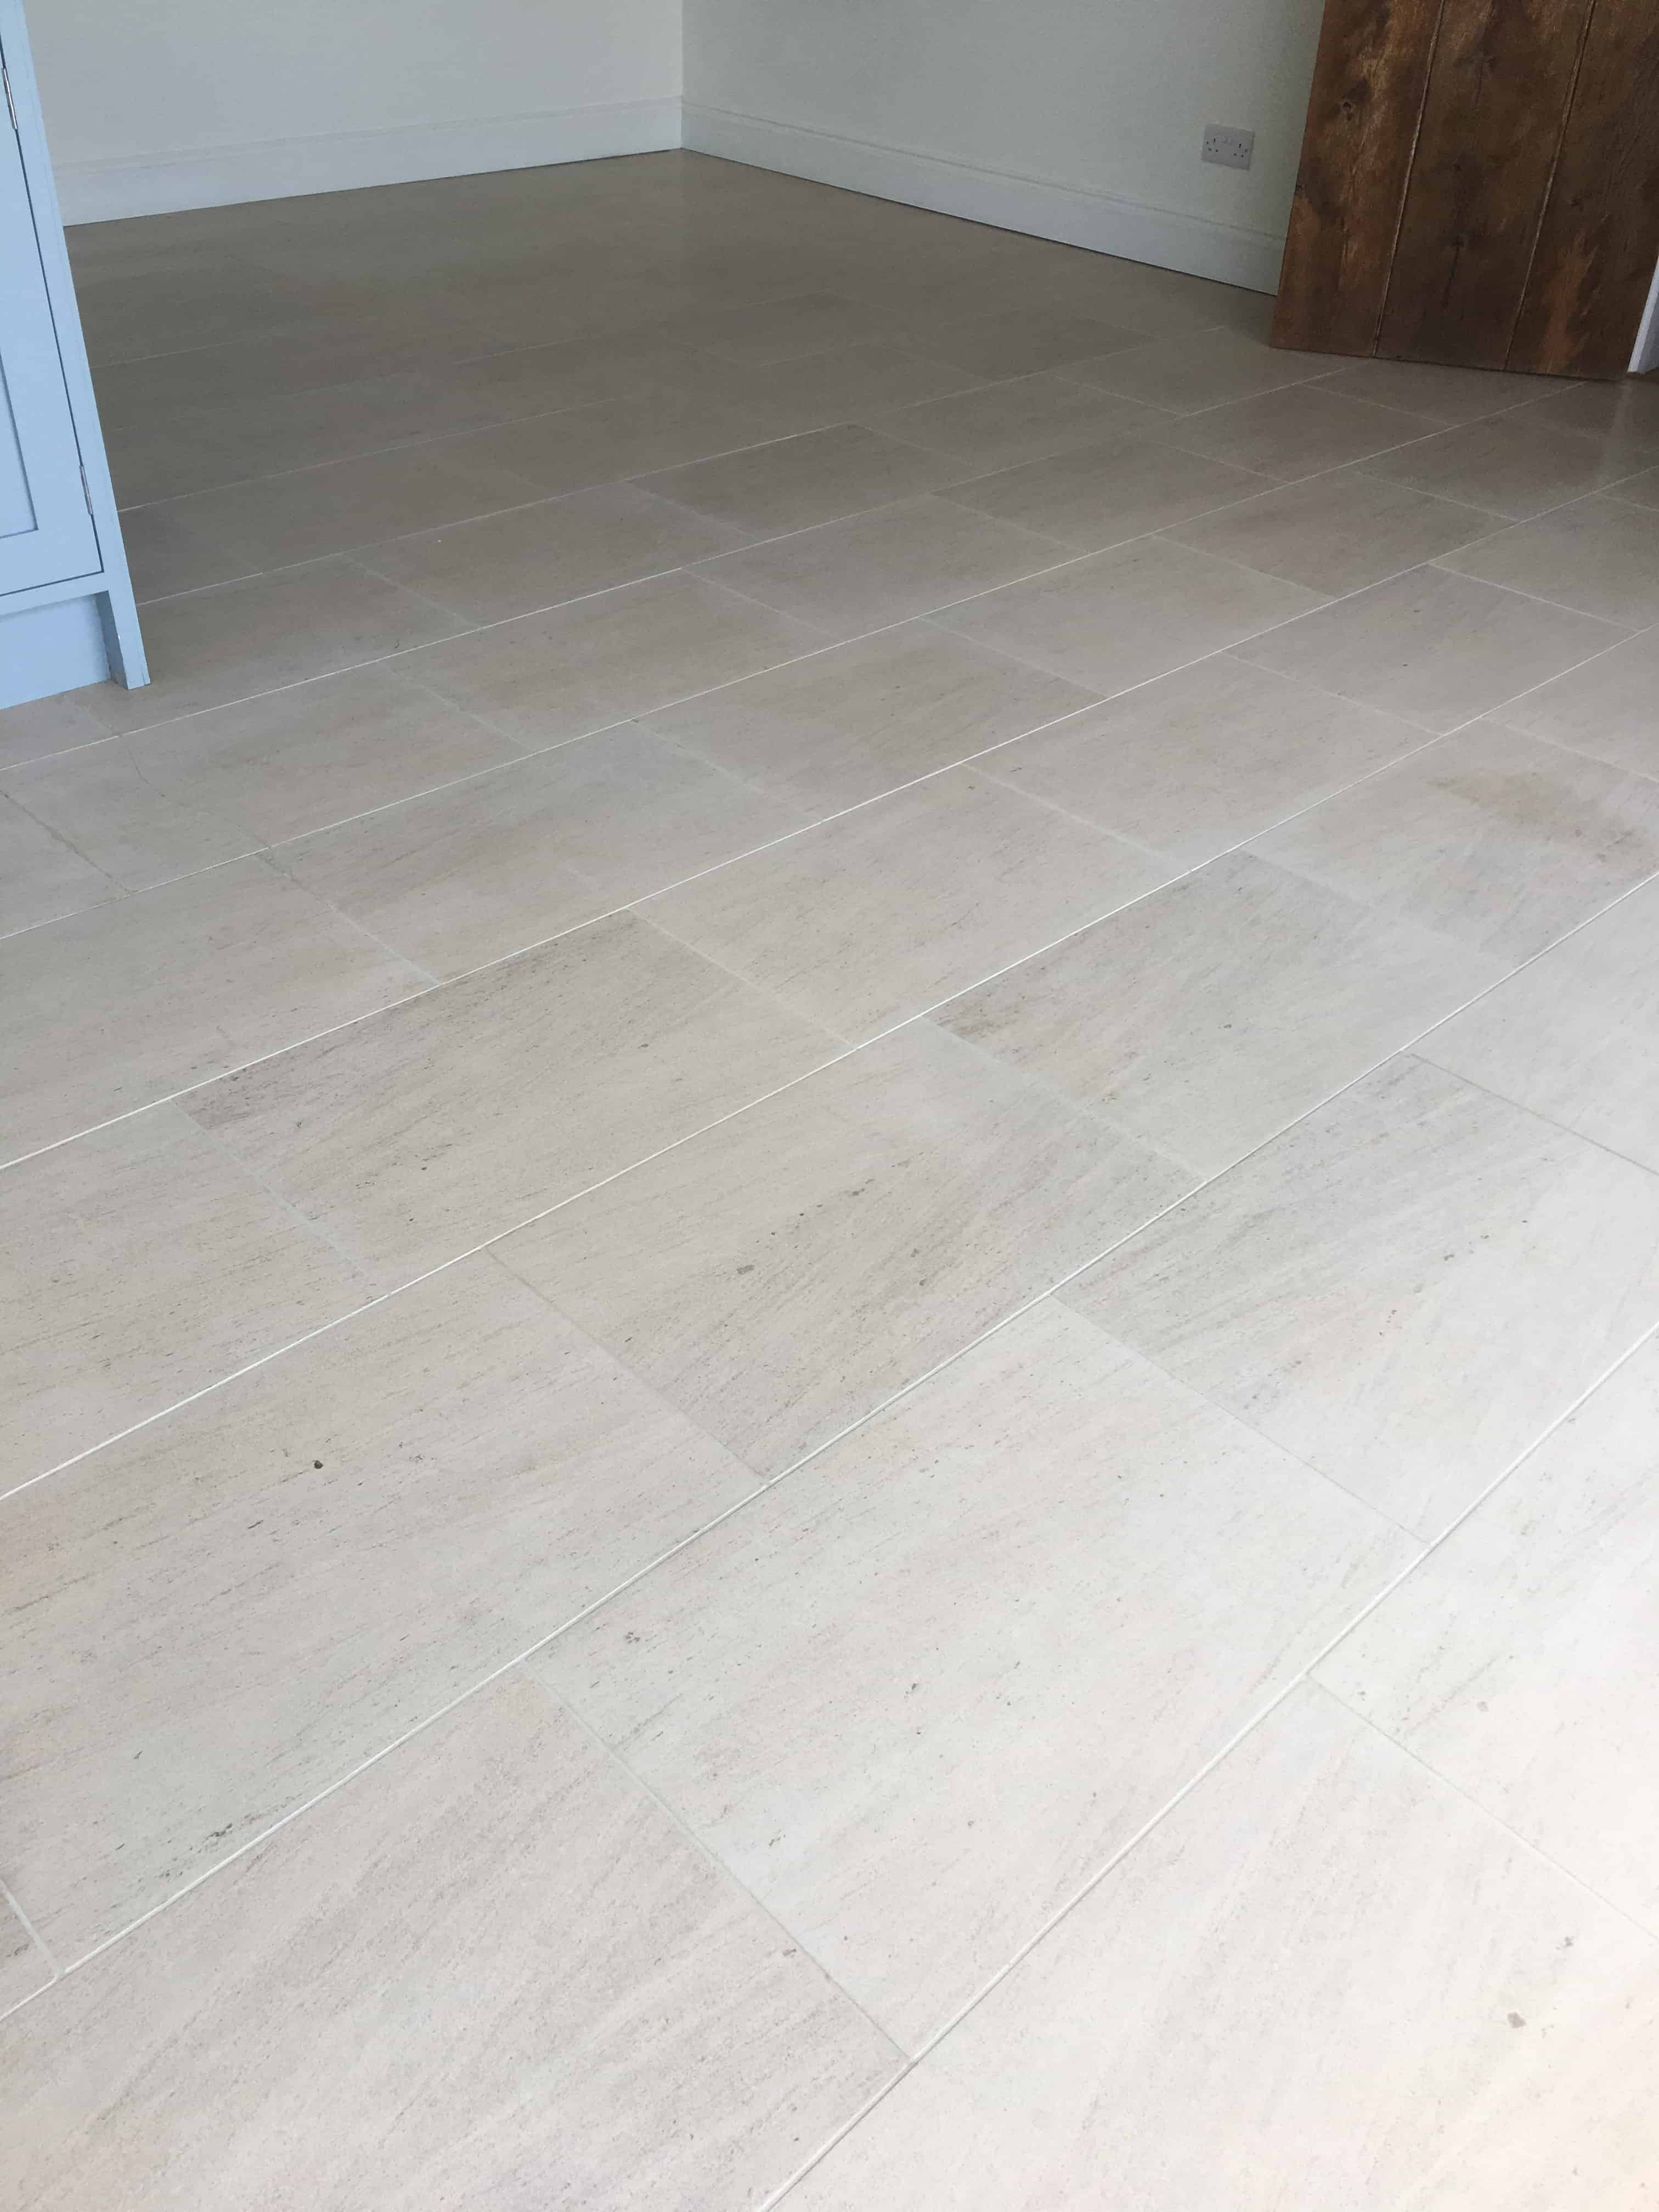 Limestone Floor Tile and Grout After Cleaning in Underriver Sevenoaks